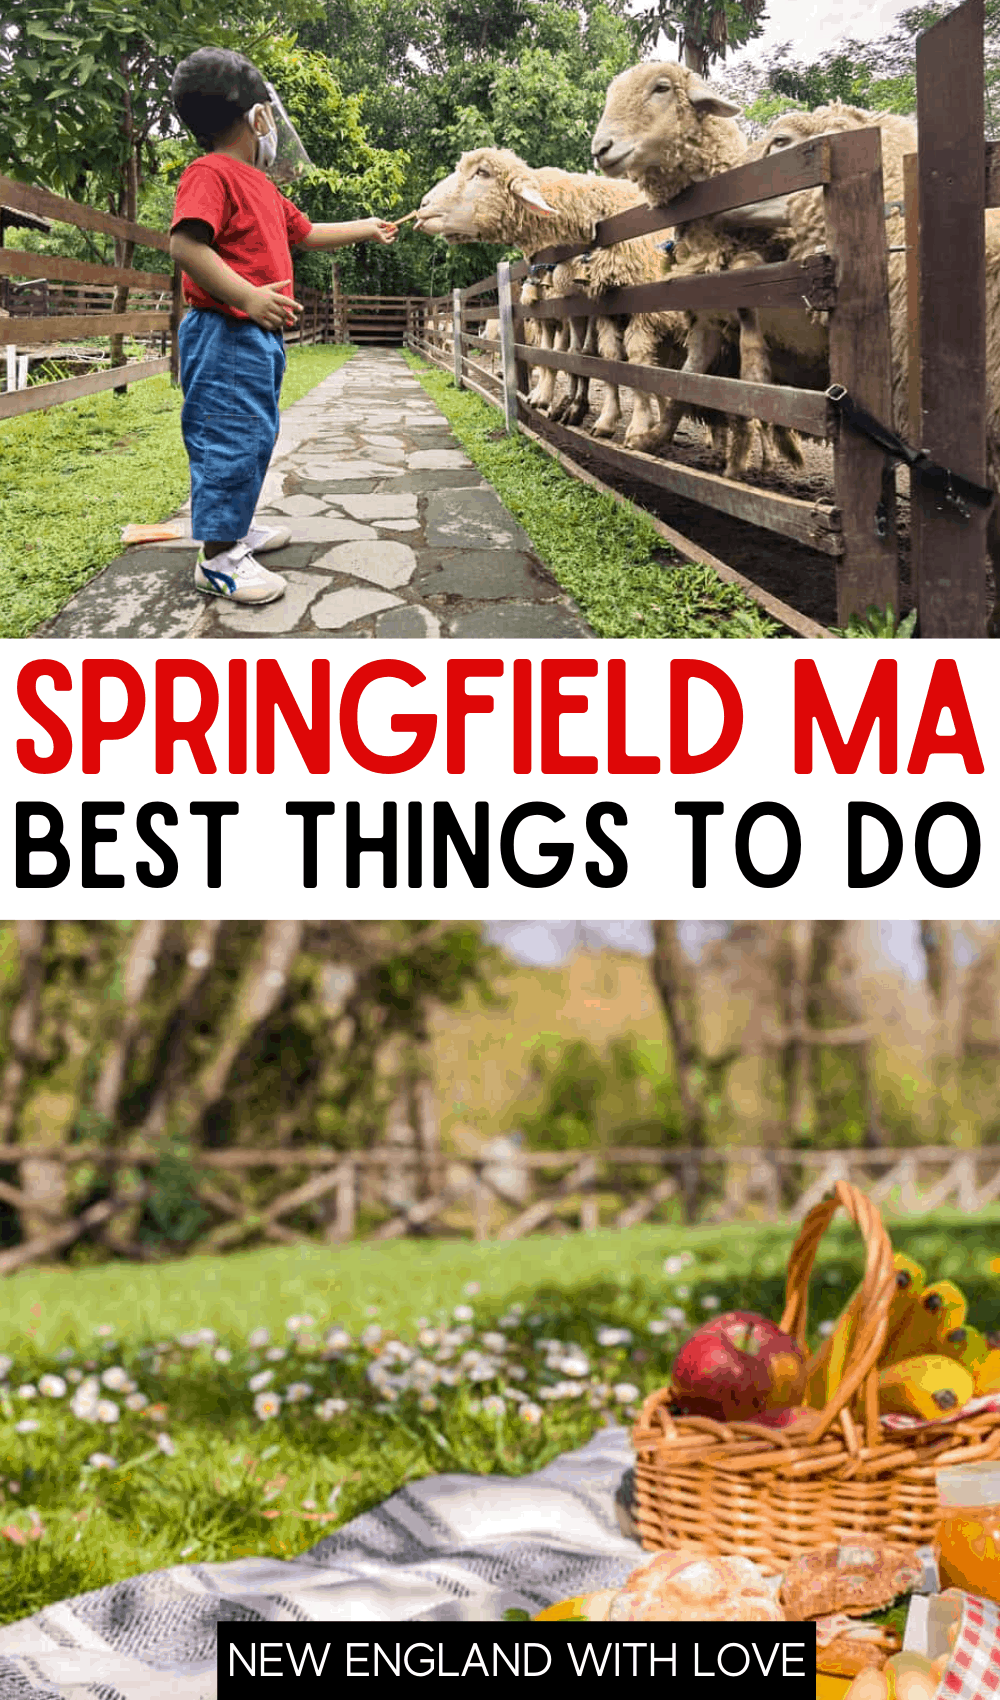 Pinterest graphic reading "SPRINGFIELD MA BEST THINGS TO DO"